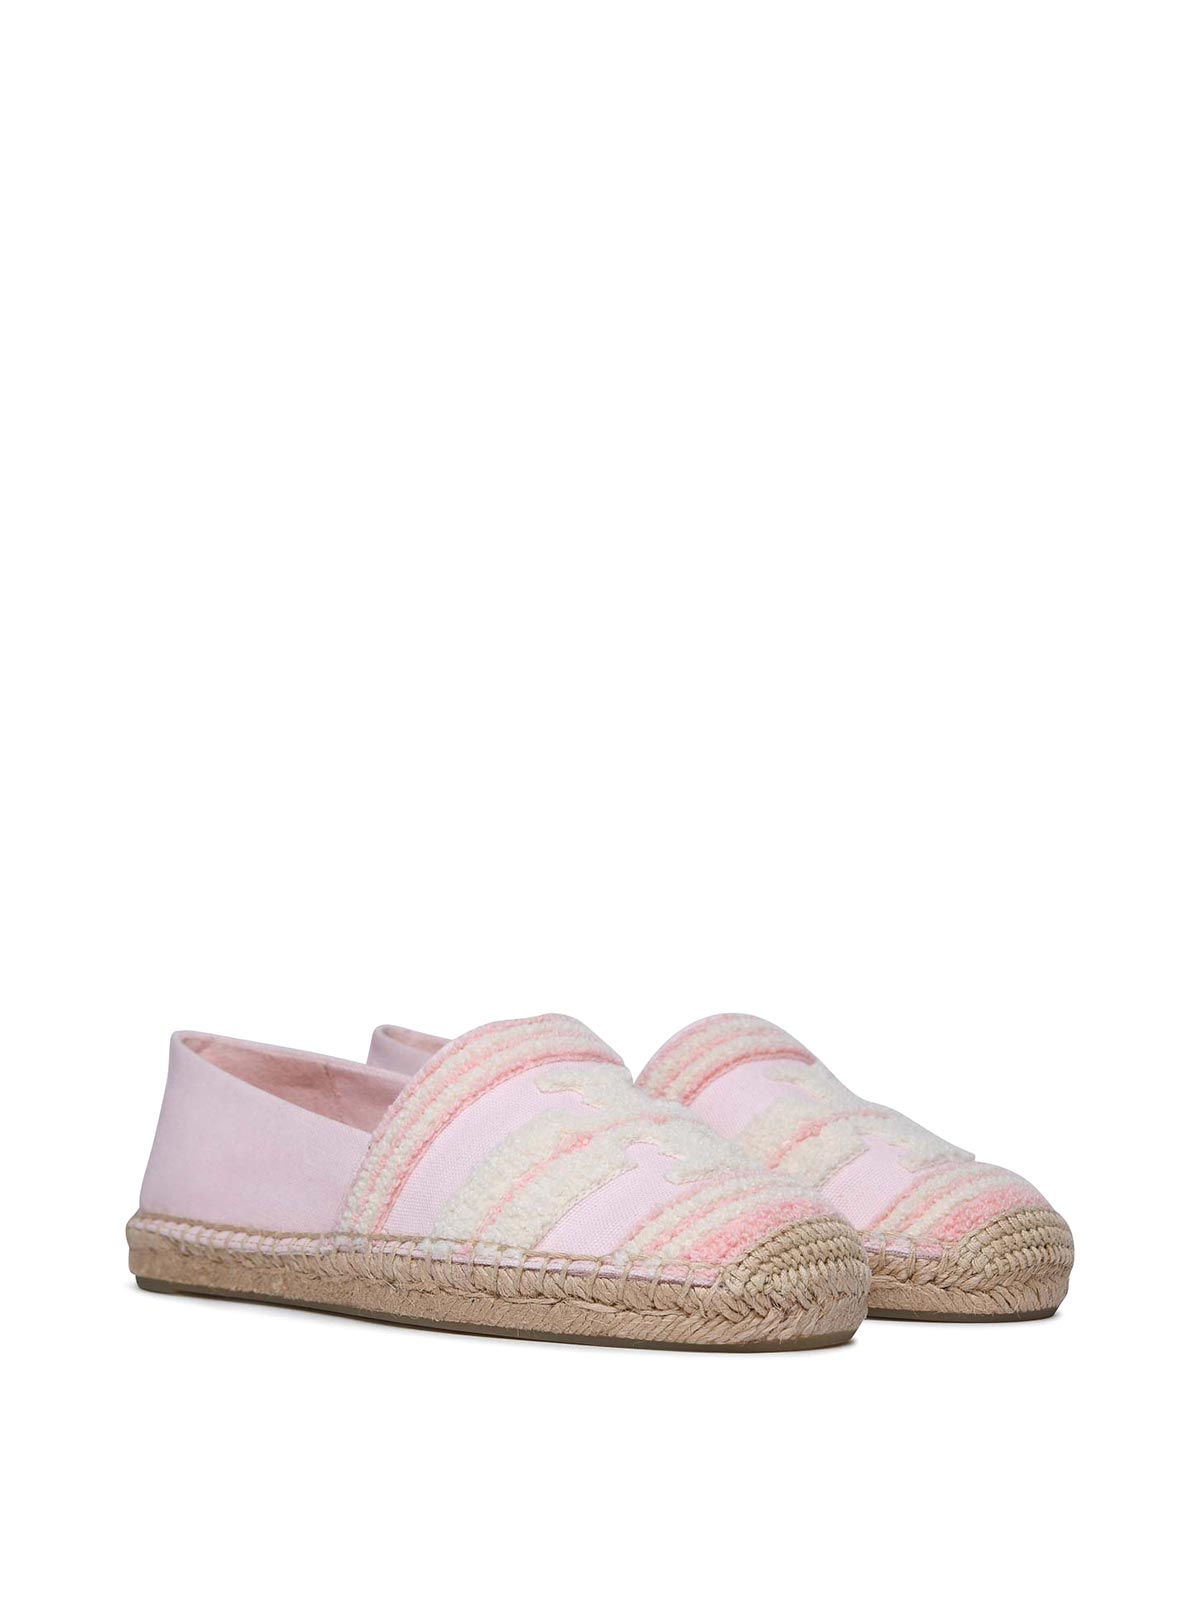 Shop Tory Burch Pink Coon Espadrilles In Nude & Neutrals